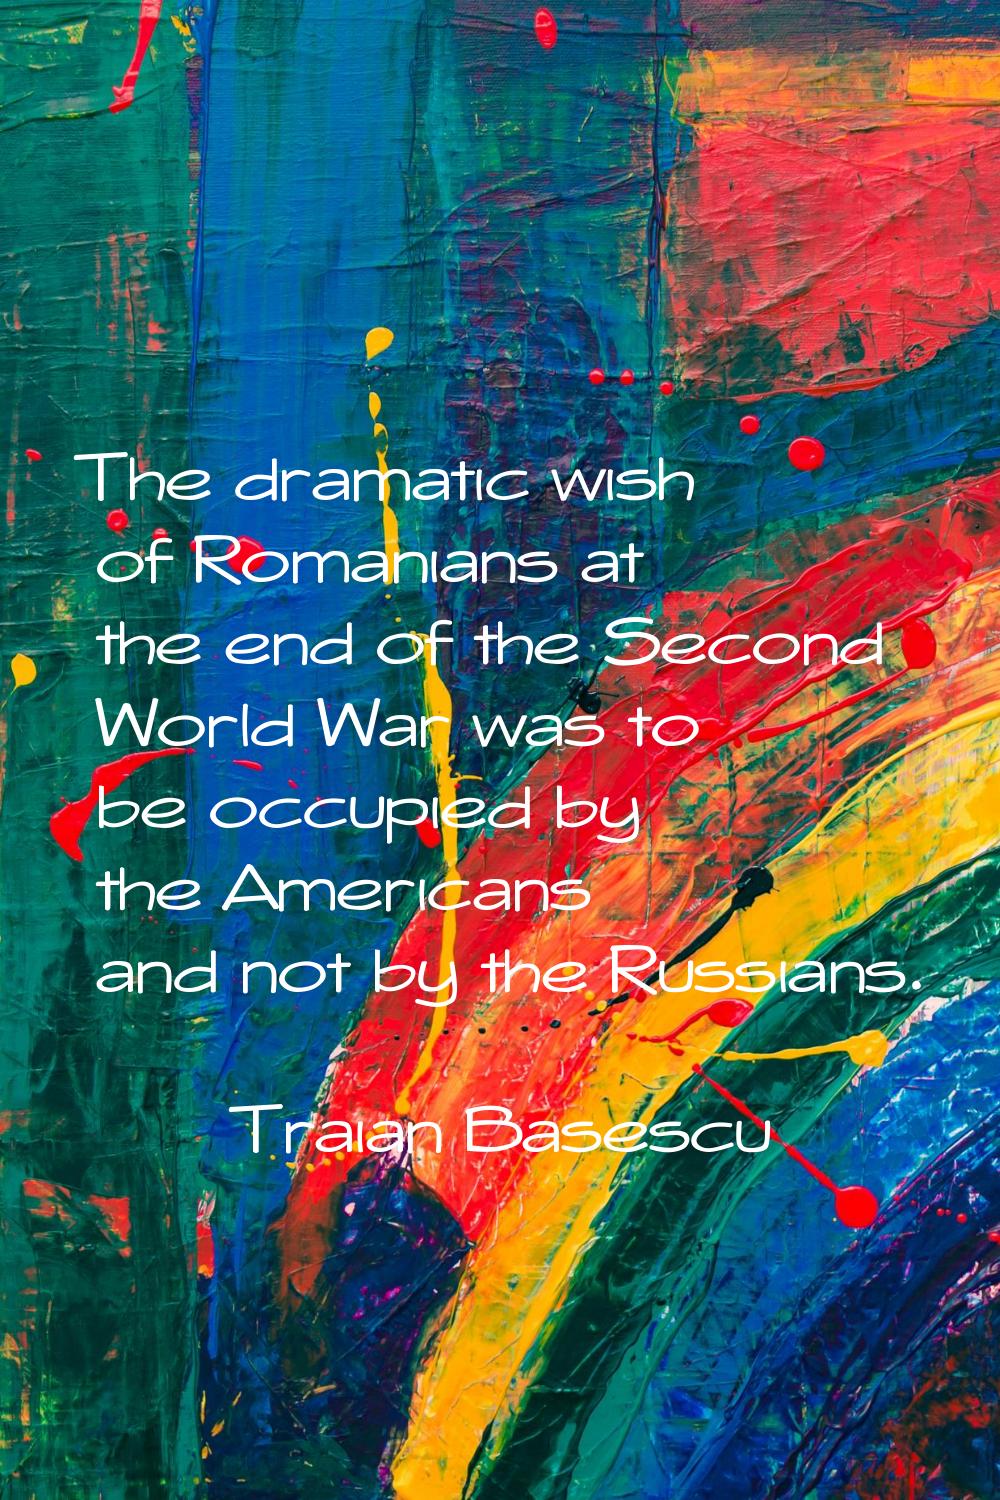 The dramatic wish of Romanians at the end of the Second World War was to be occupied by the America